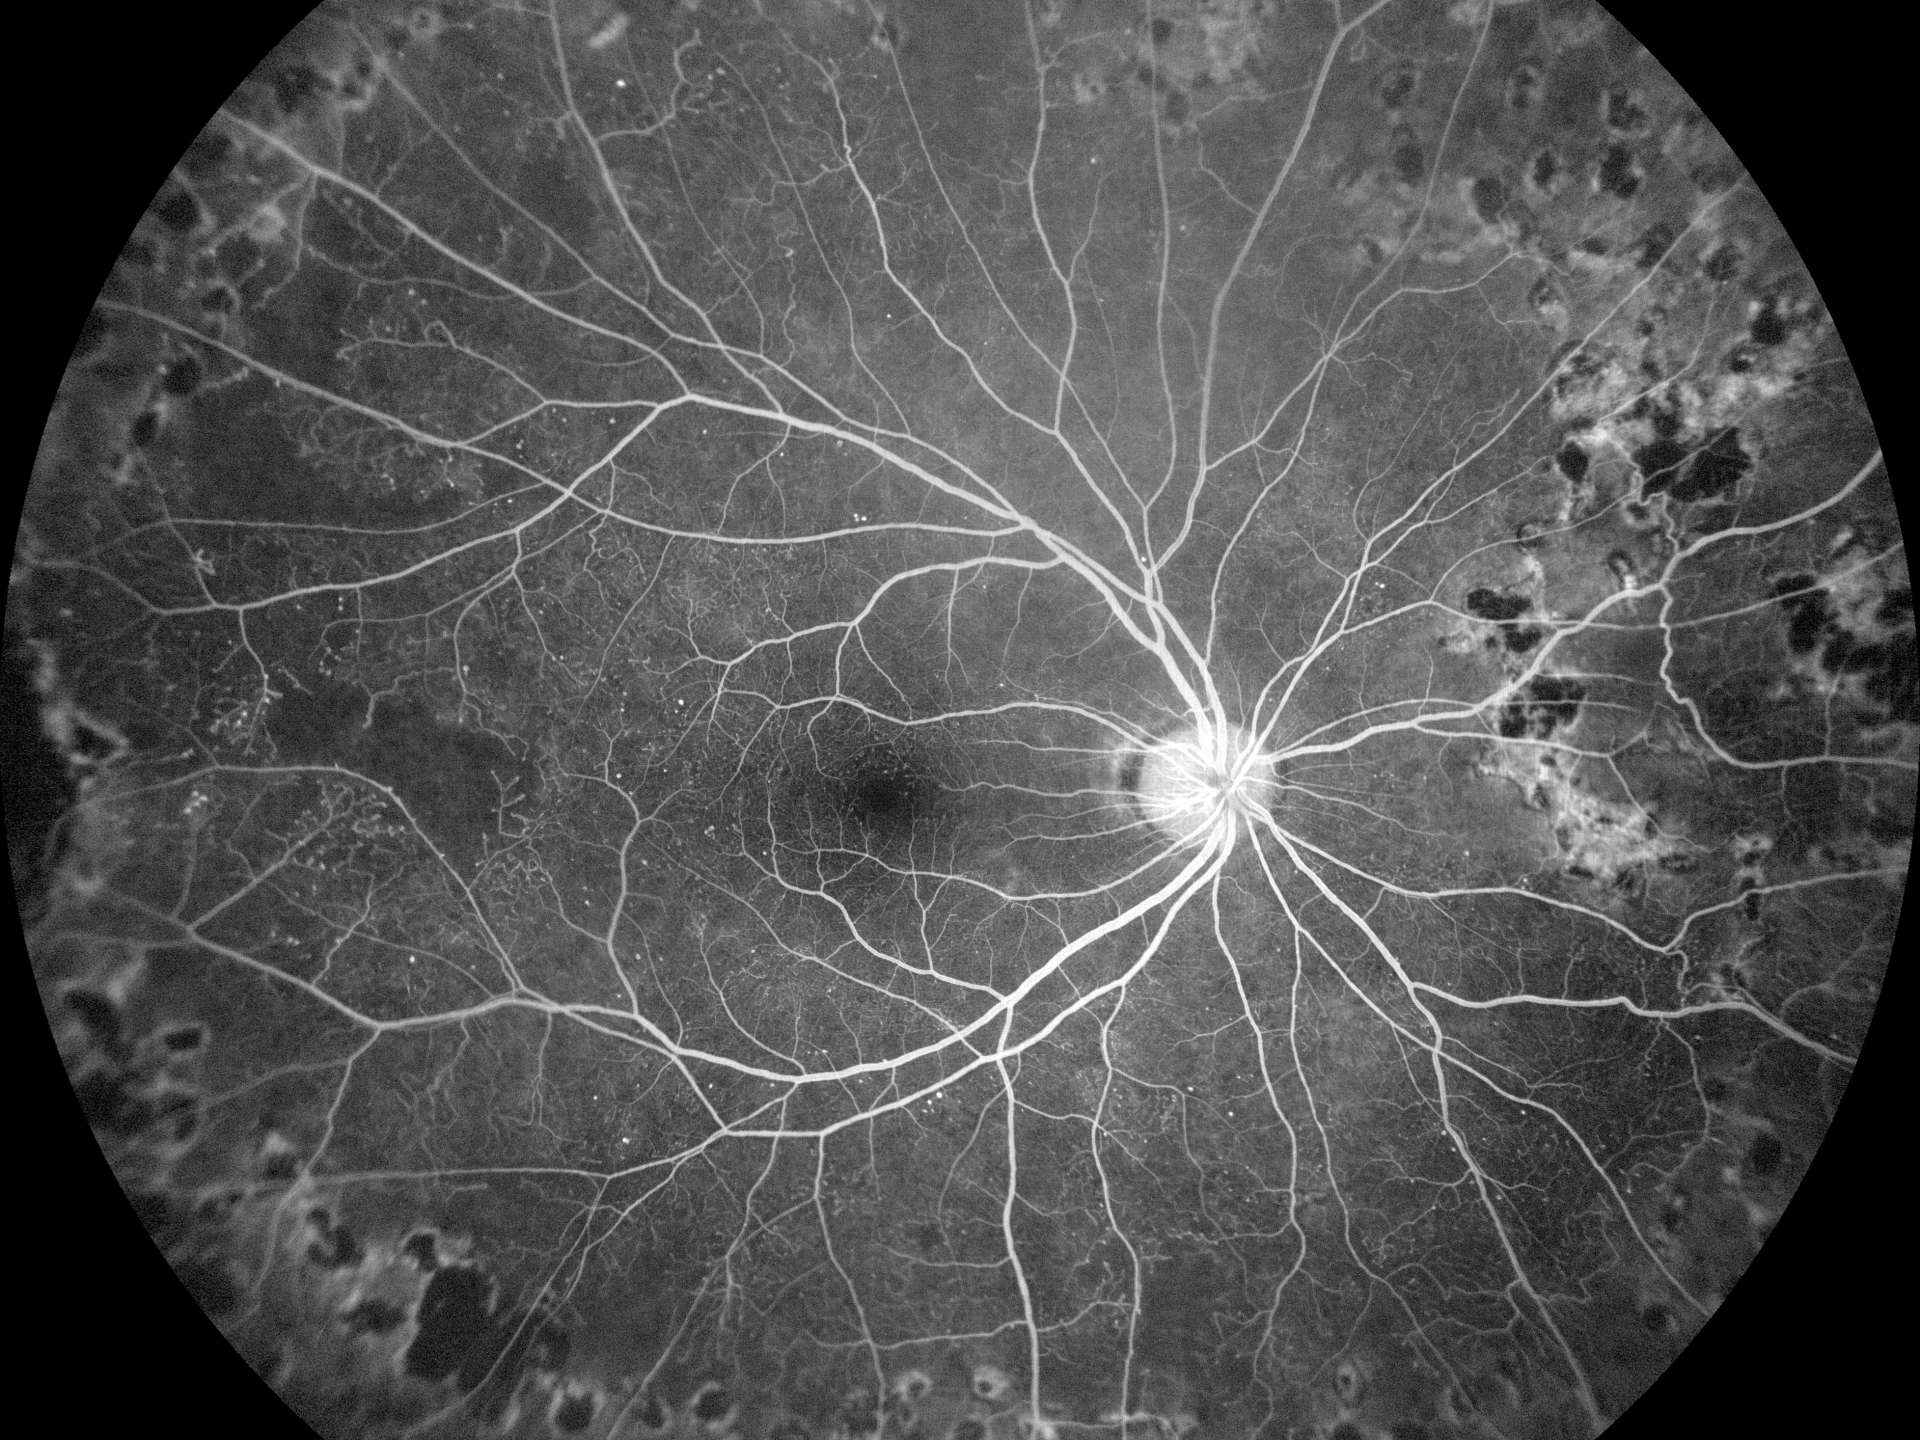 ZEISS Retina Seeing wider and deeper